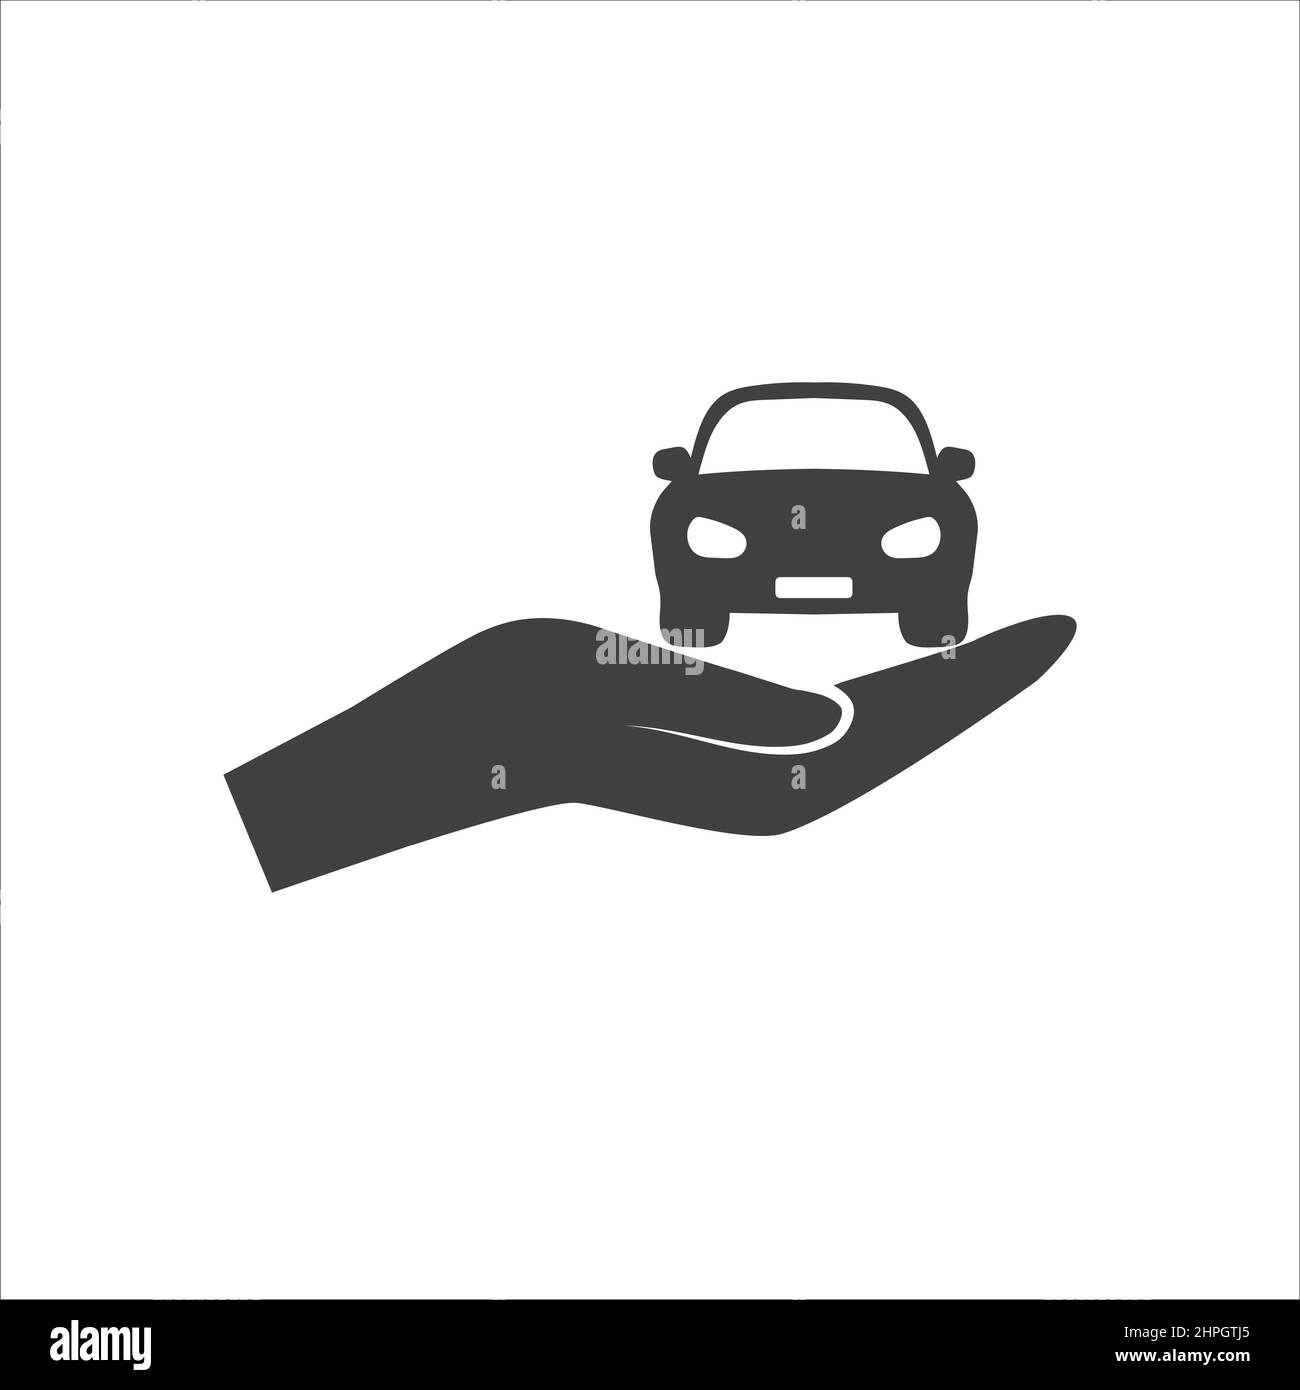 Used car and dealership icon for used car business design Stock Vector